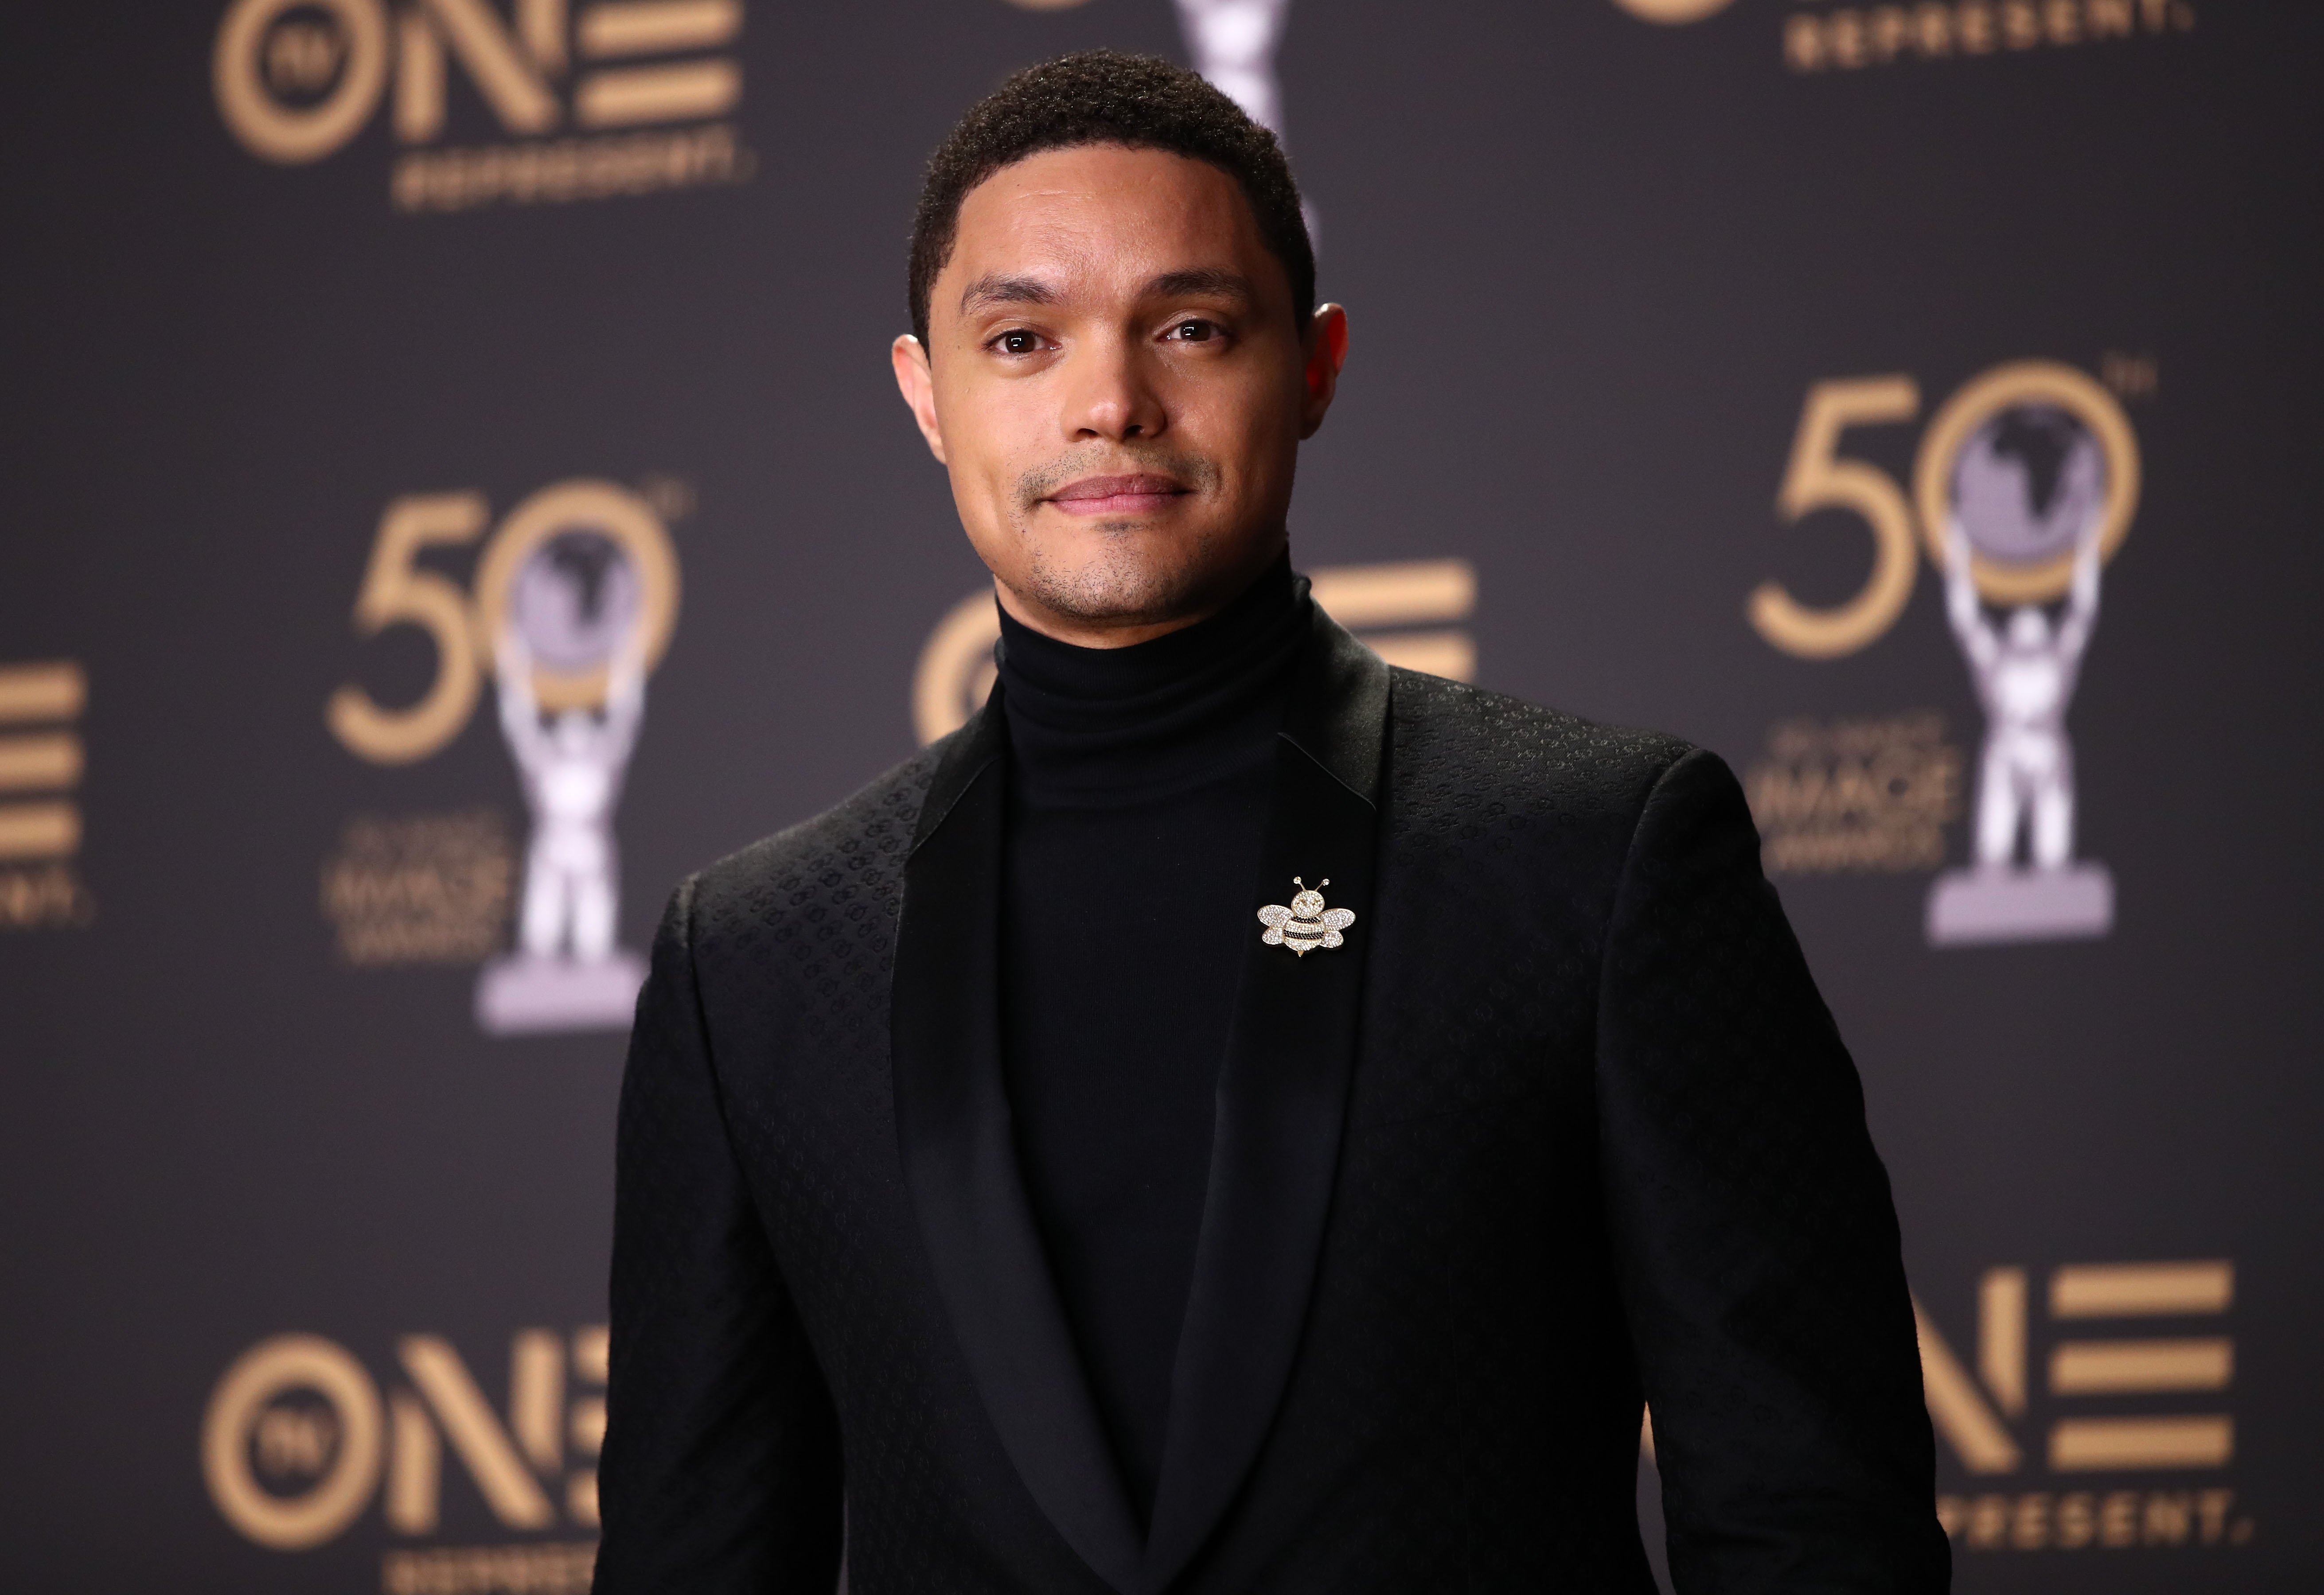 Trevor Noah attends the 50th NAACP Image Awards at Dolby Theatre on March 30, 2019 | Photo: Getty Images